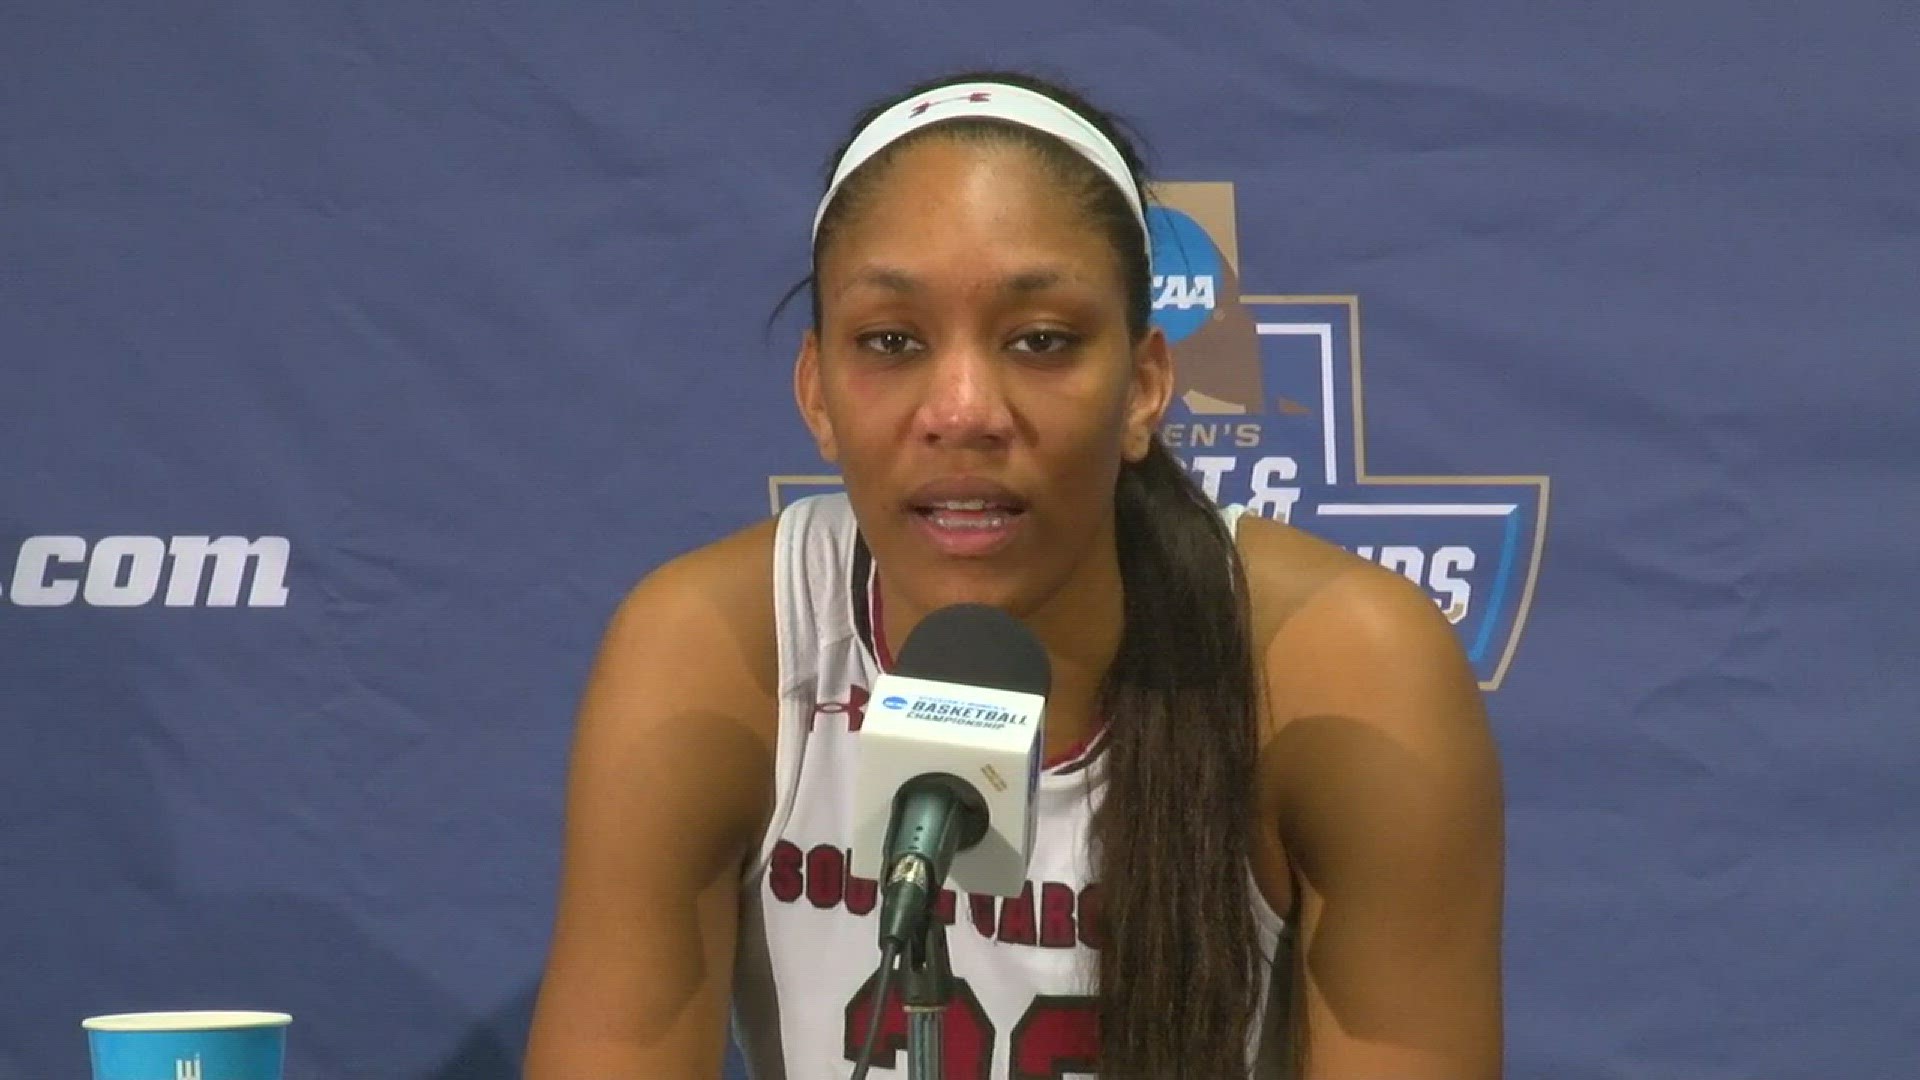 The Gamecocks hold off the North Carolina A&T Aggies 63-52 in the first round of the NCAA Tournament. A'ja Wilson led USC with 19 points and 16 rebounds while freshman Bianca Jackson scored 16 in her March Madness debut.But the Gamecocks saw their 20